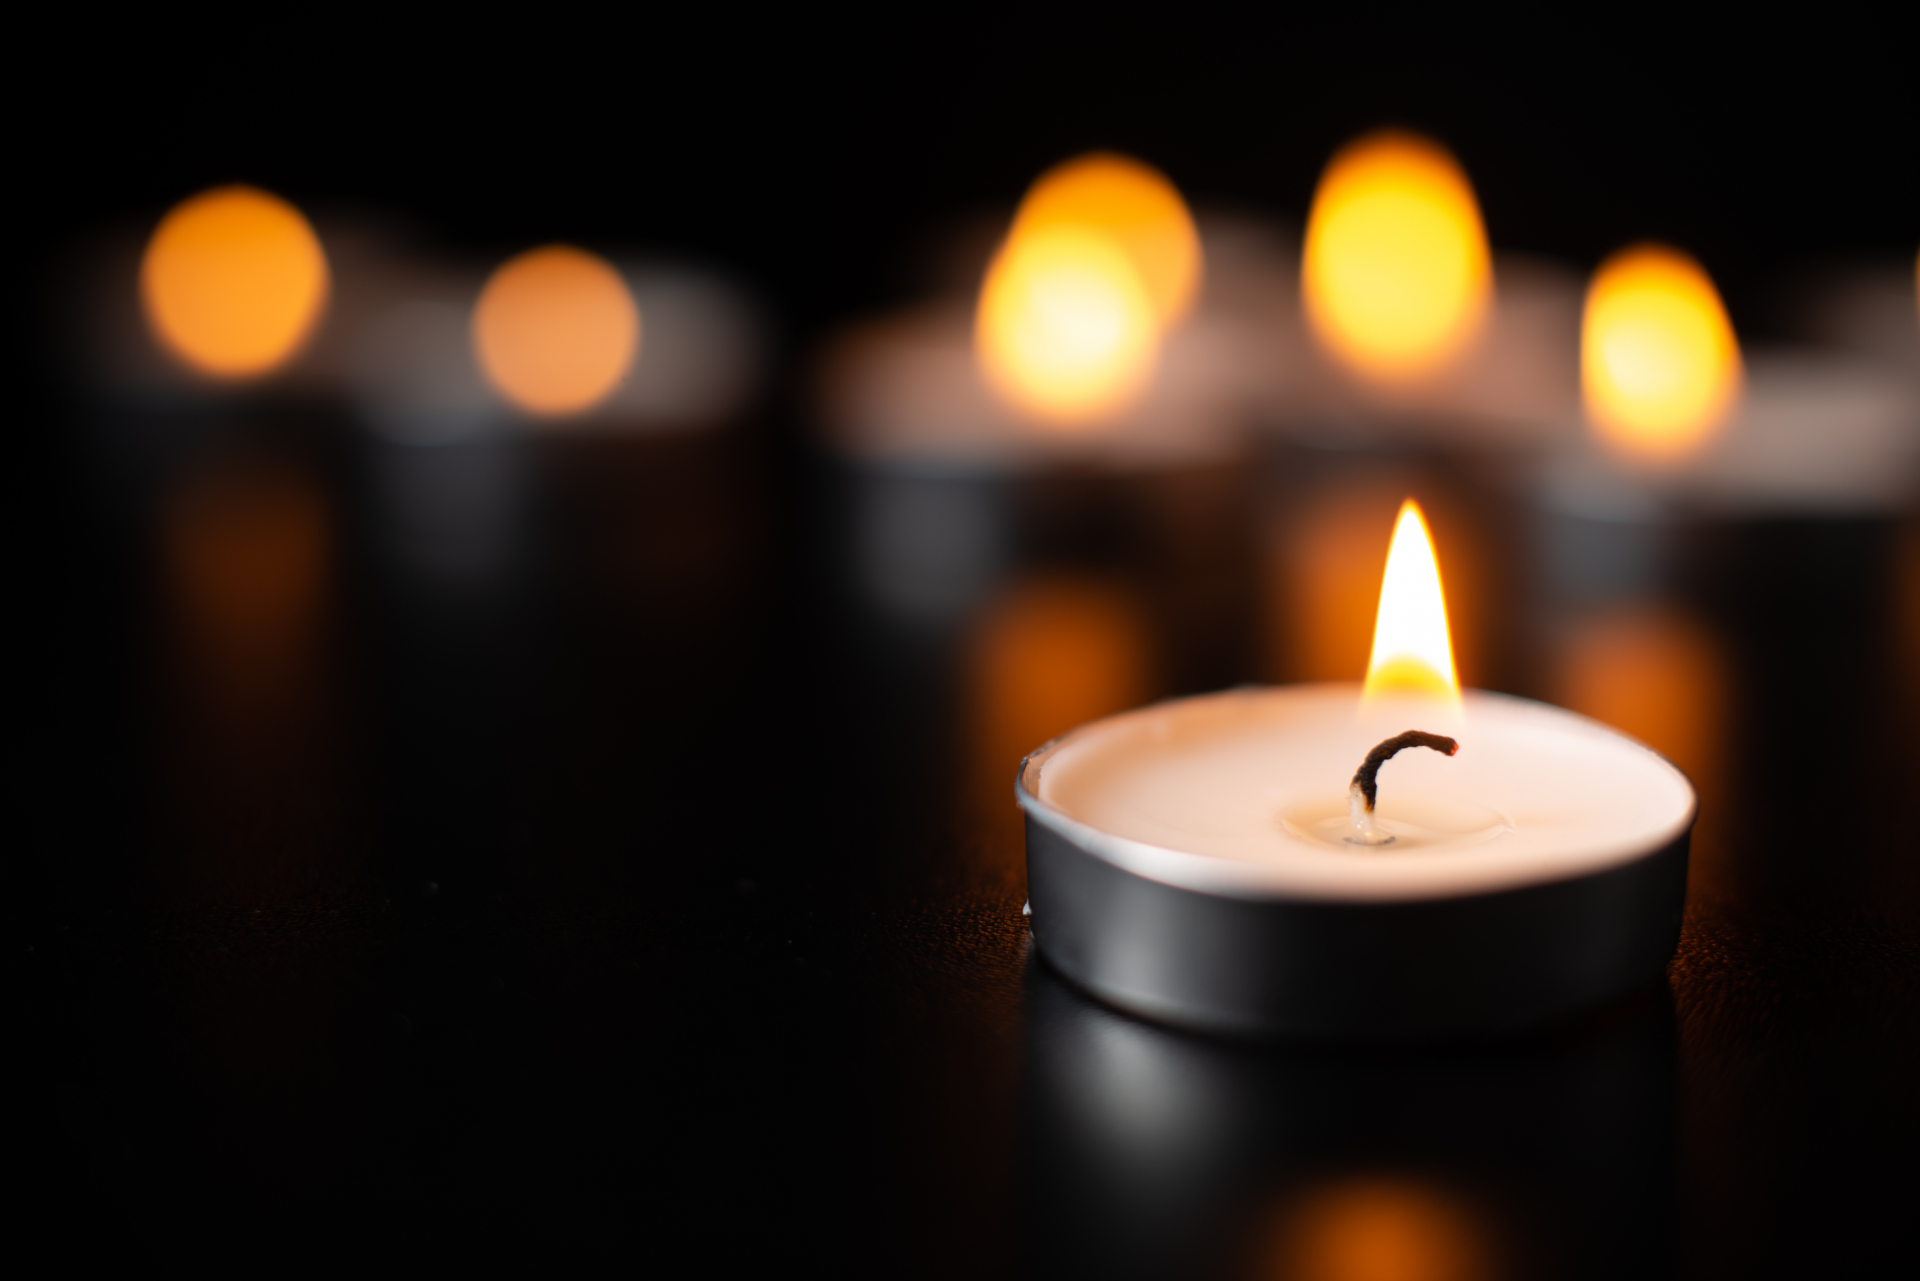 front-view-burning-candles-pitch-black-surface.jpg